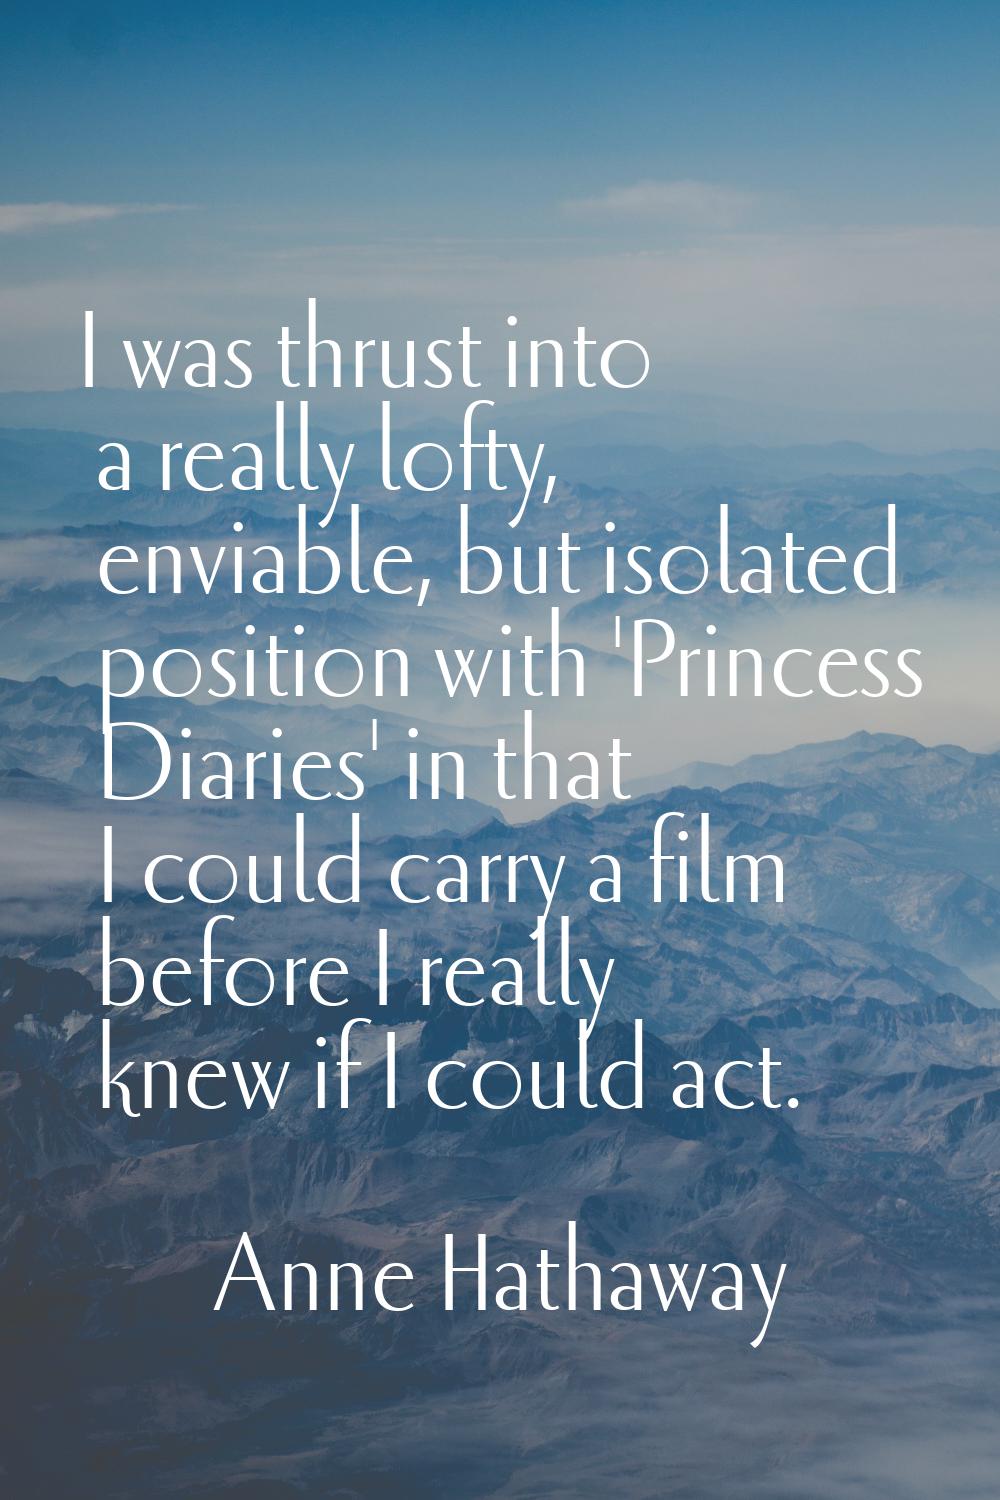 I was thrust into a really lofty, enviable, but isolated position with 'Princess Diaries' in that I